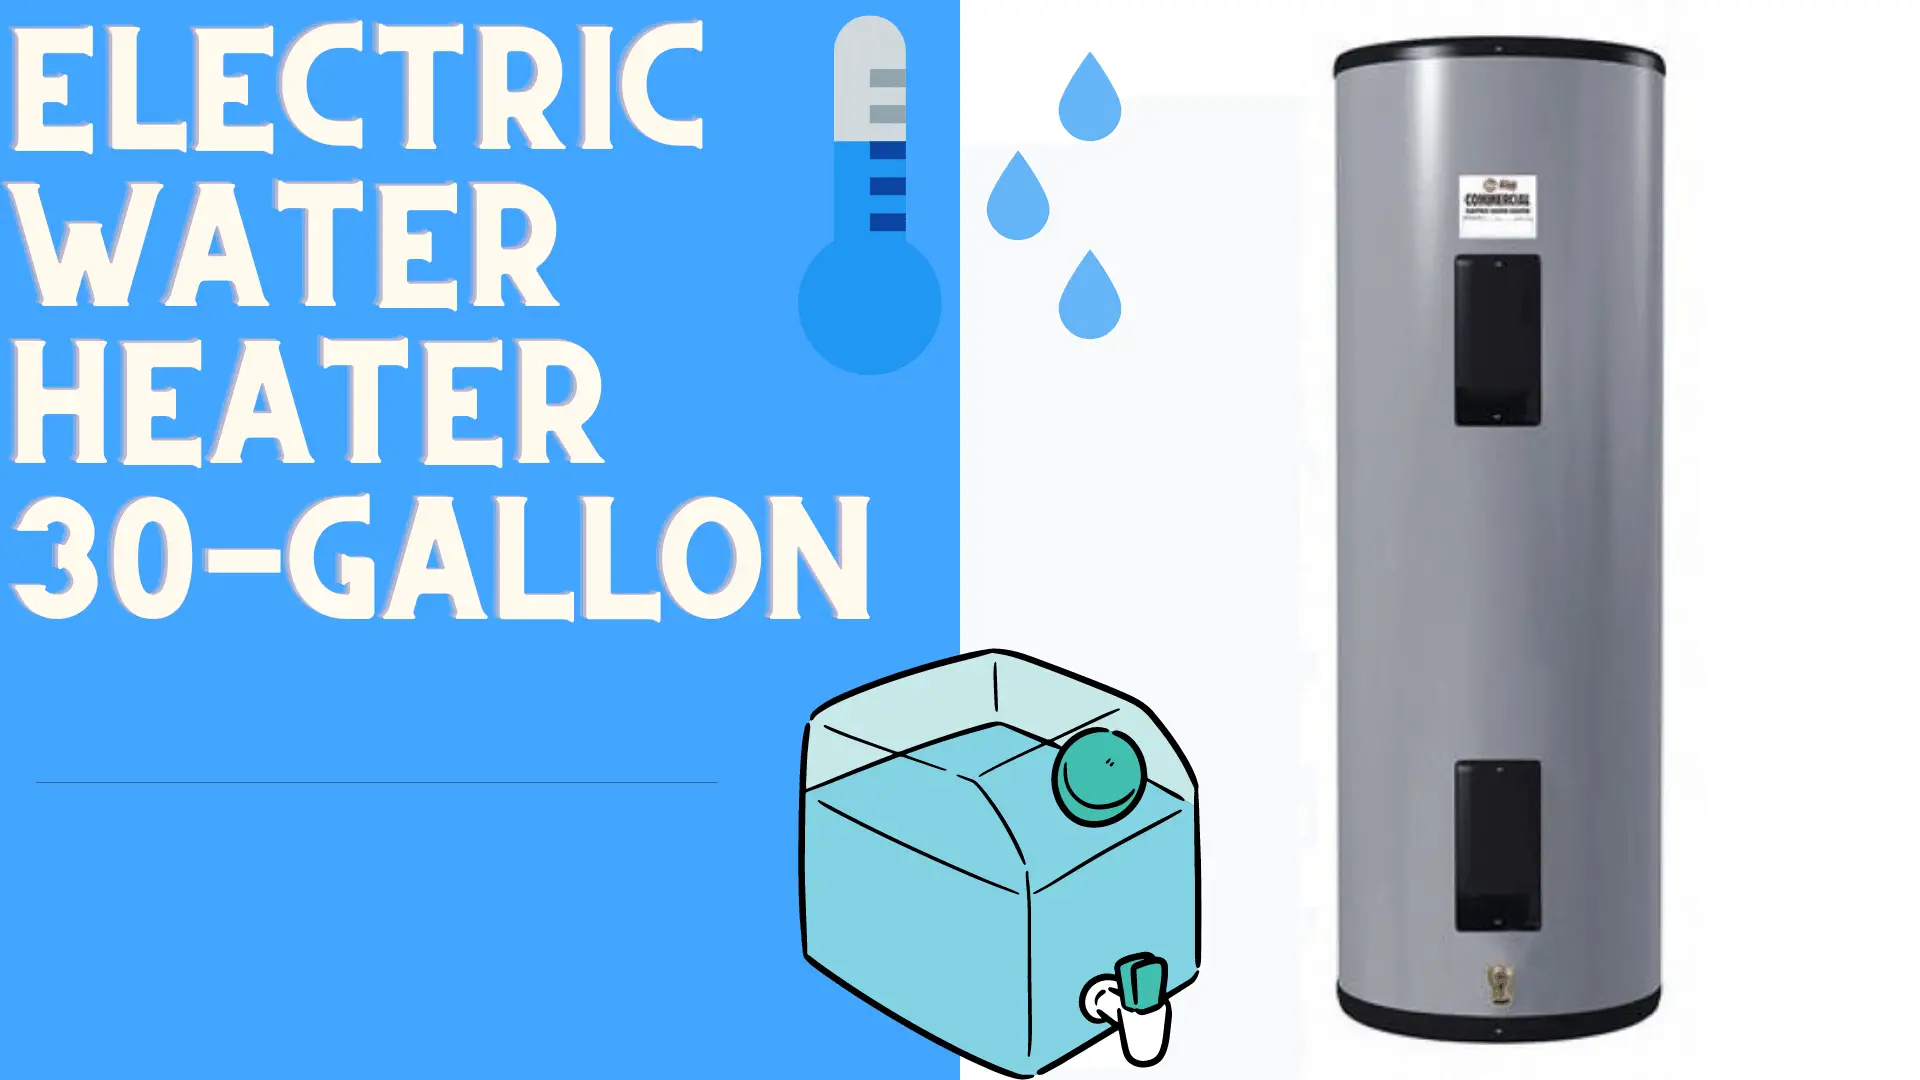 The Electric Water Heater 30 Gallon